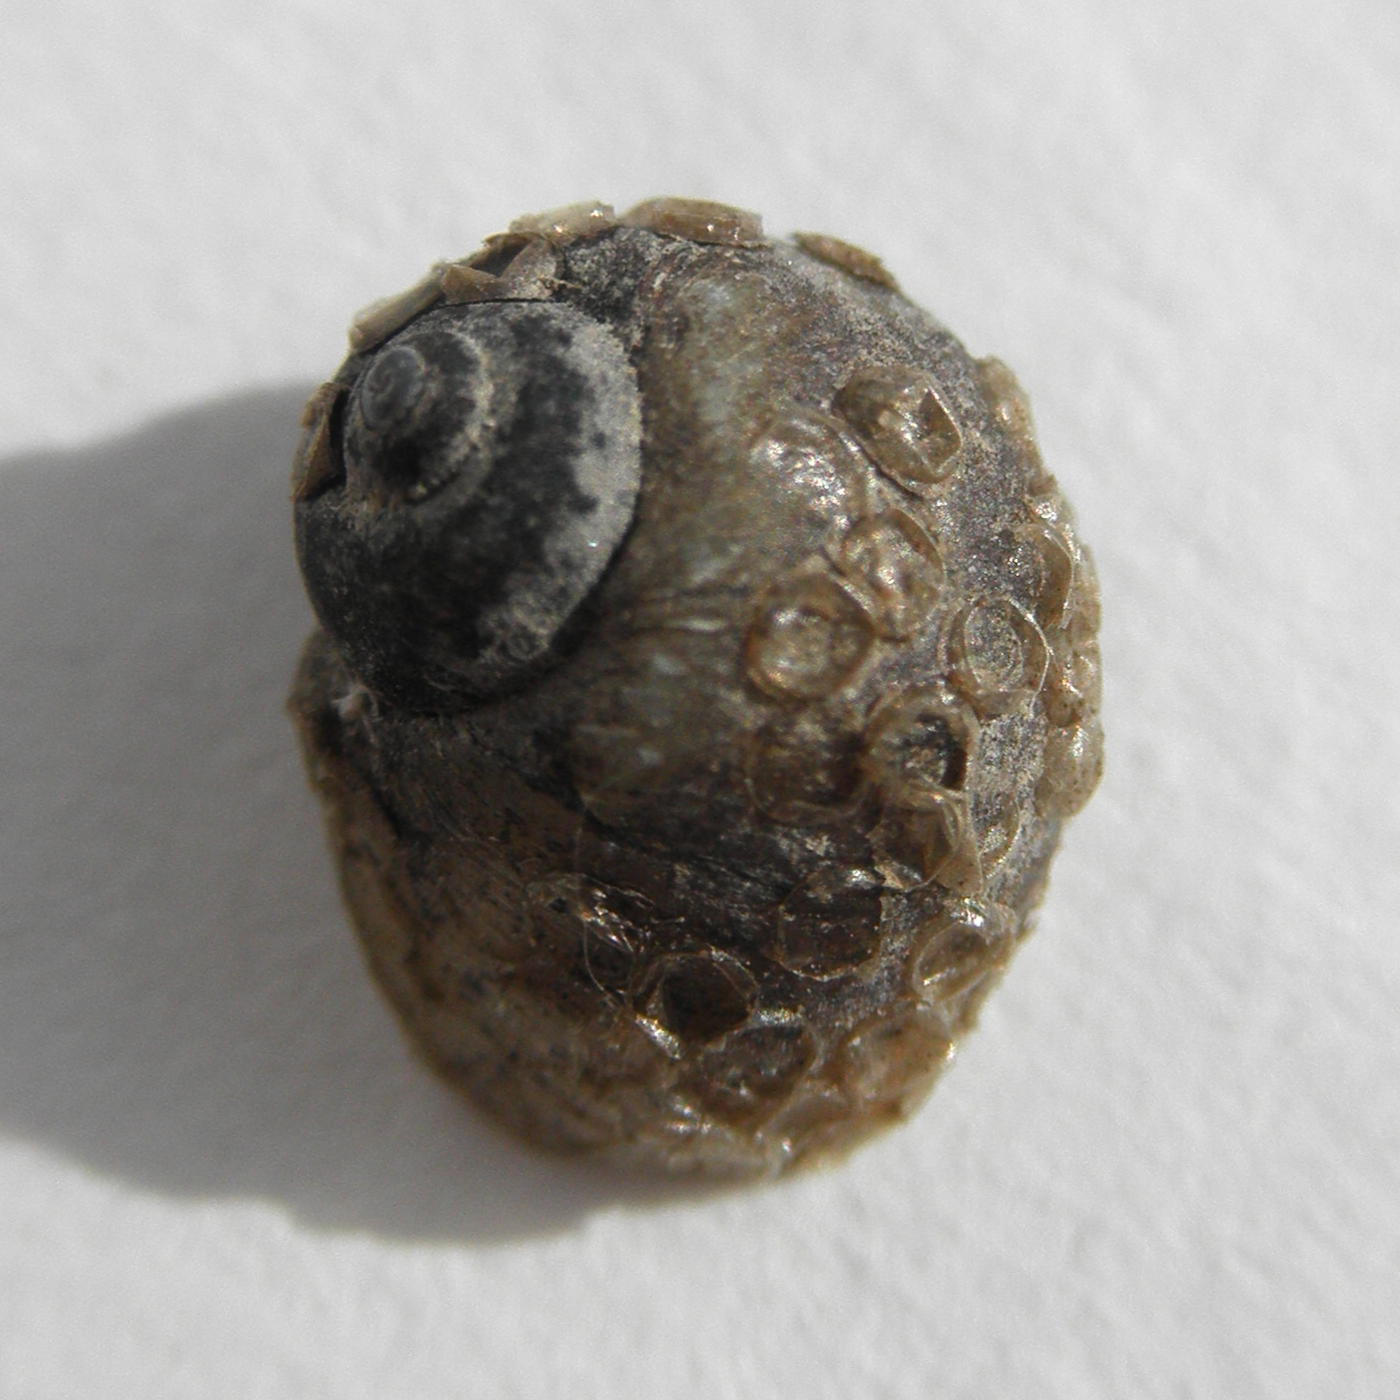 the shell of Lithoglyphus naticoides with egg capsules